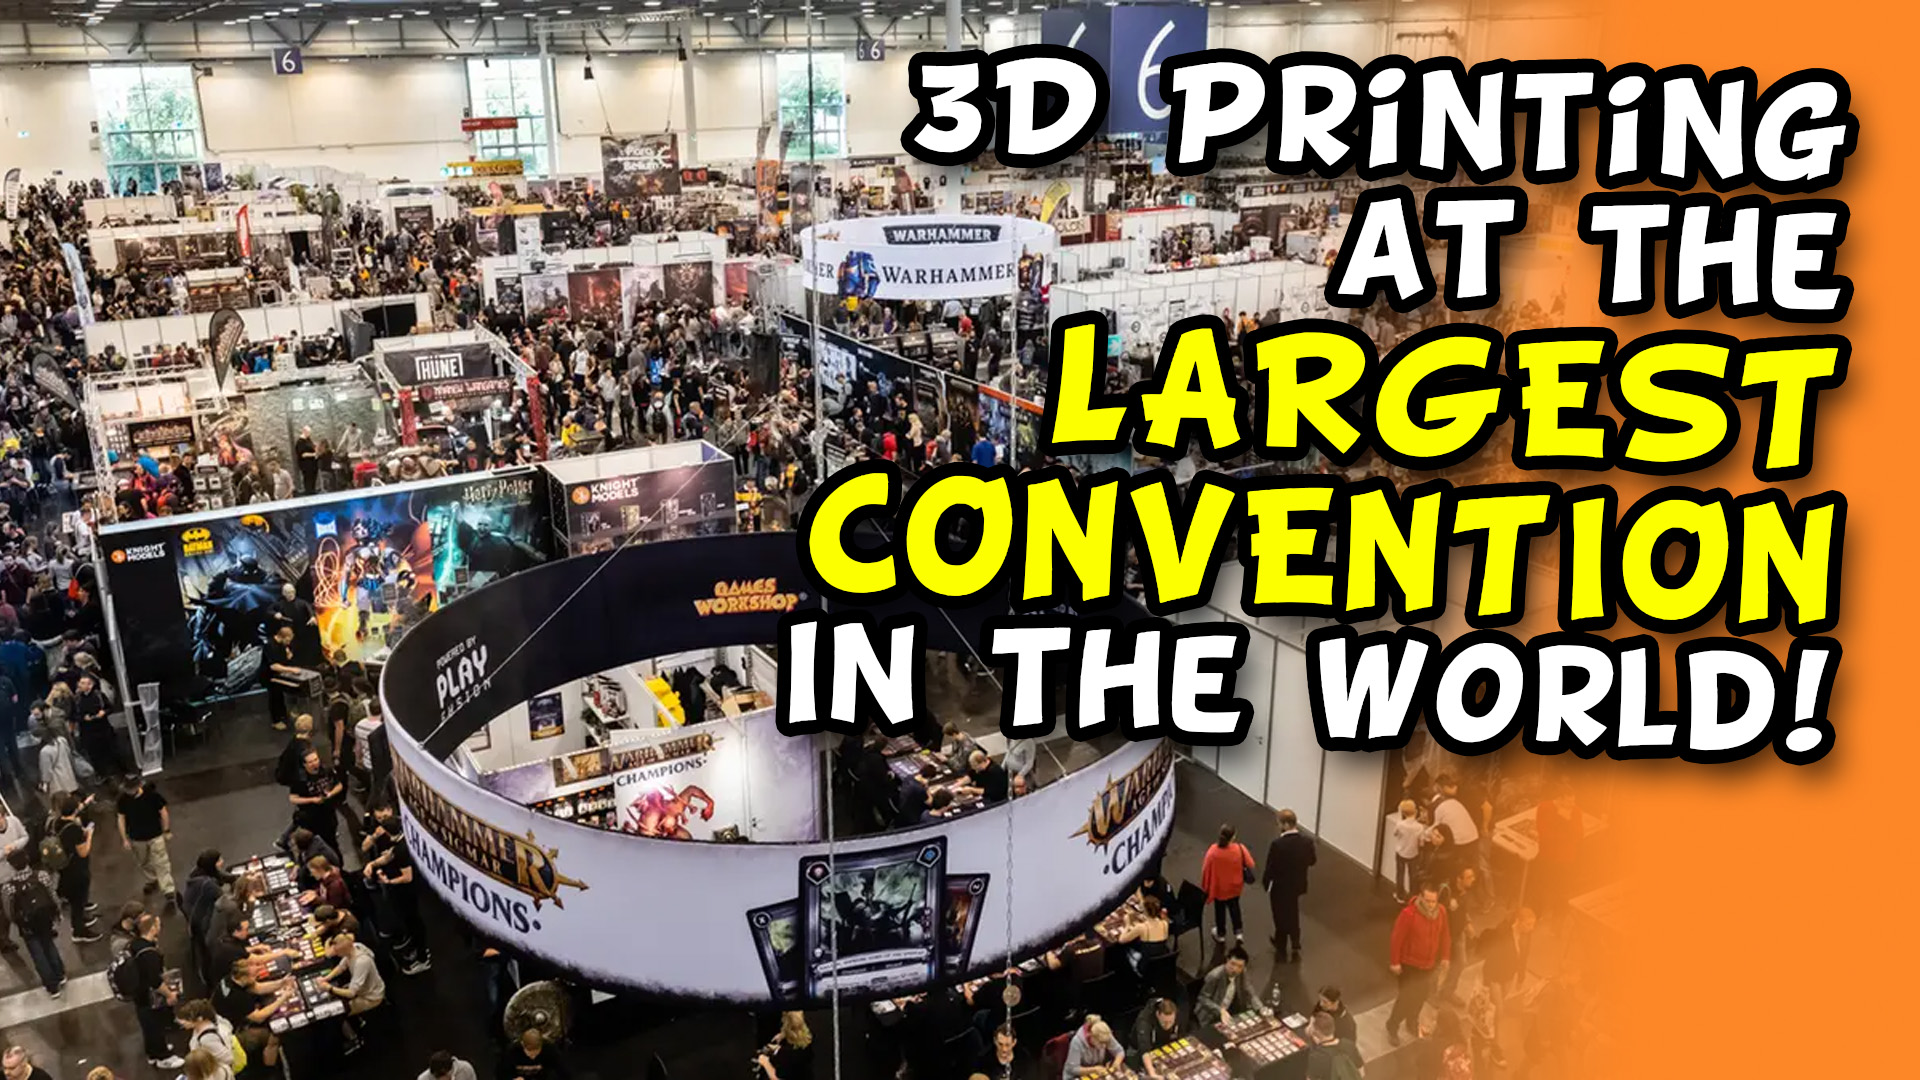 3D Printing at the Largest Convention in the World! - Print Your Games Podcast Ep 93